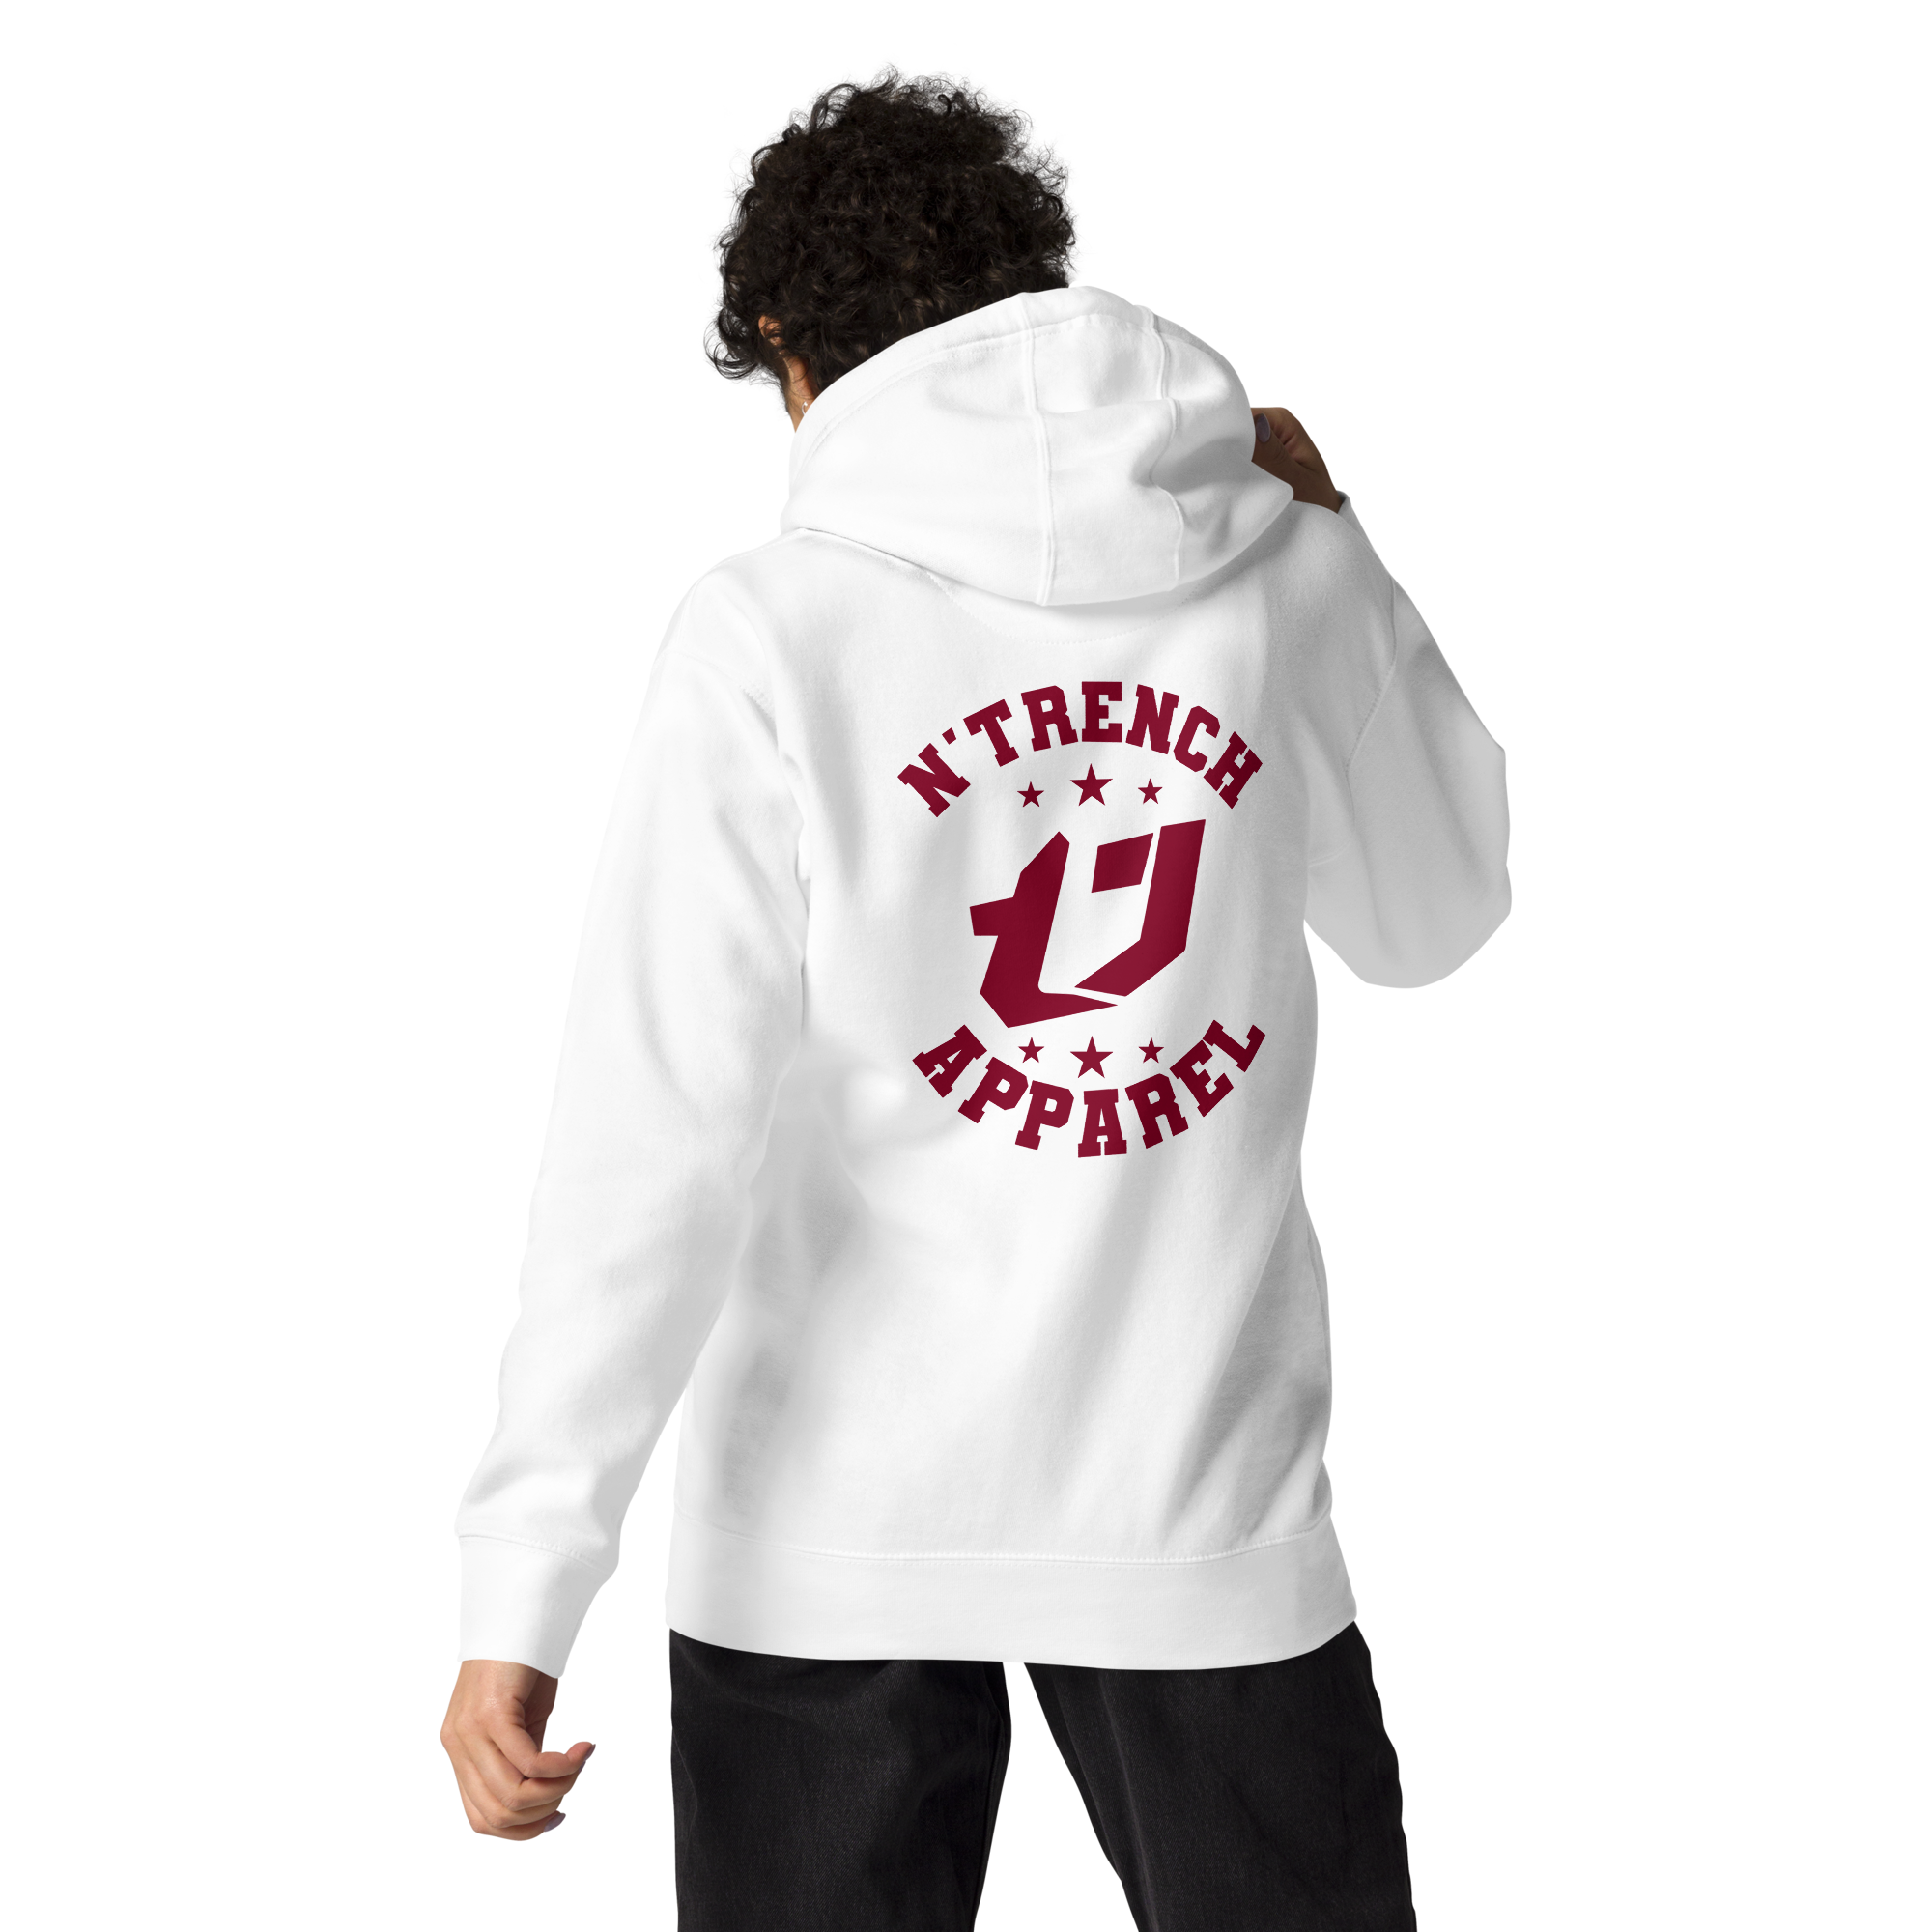 N'Trench Apparel Burgundy Logo And Font Back design Unisex Hoodie